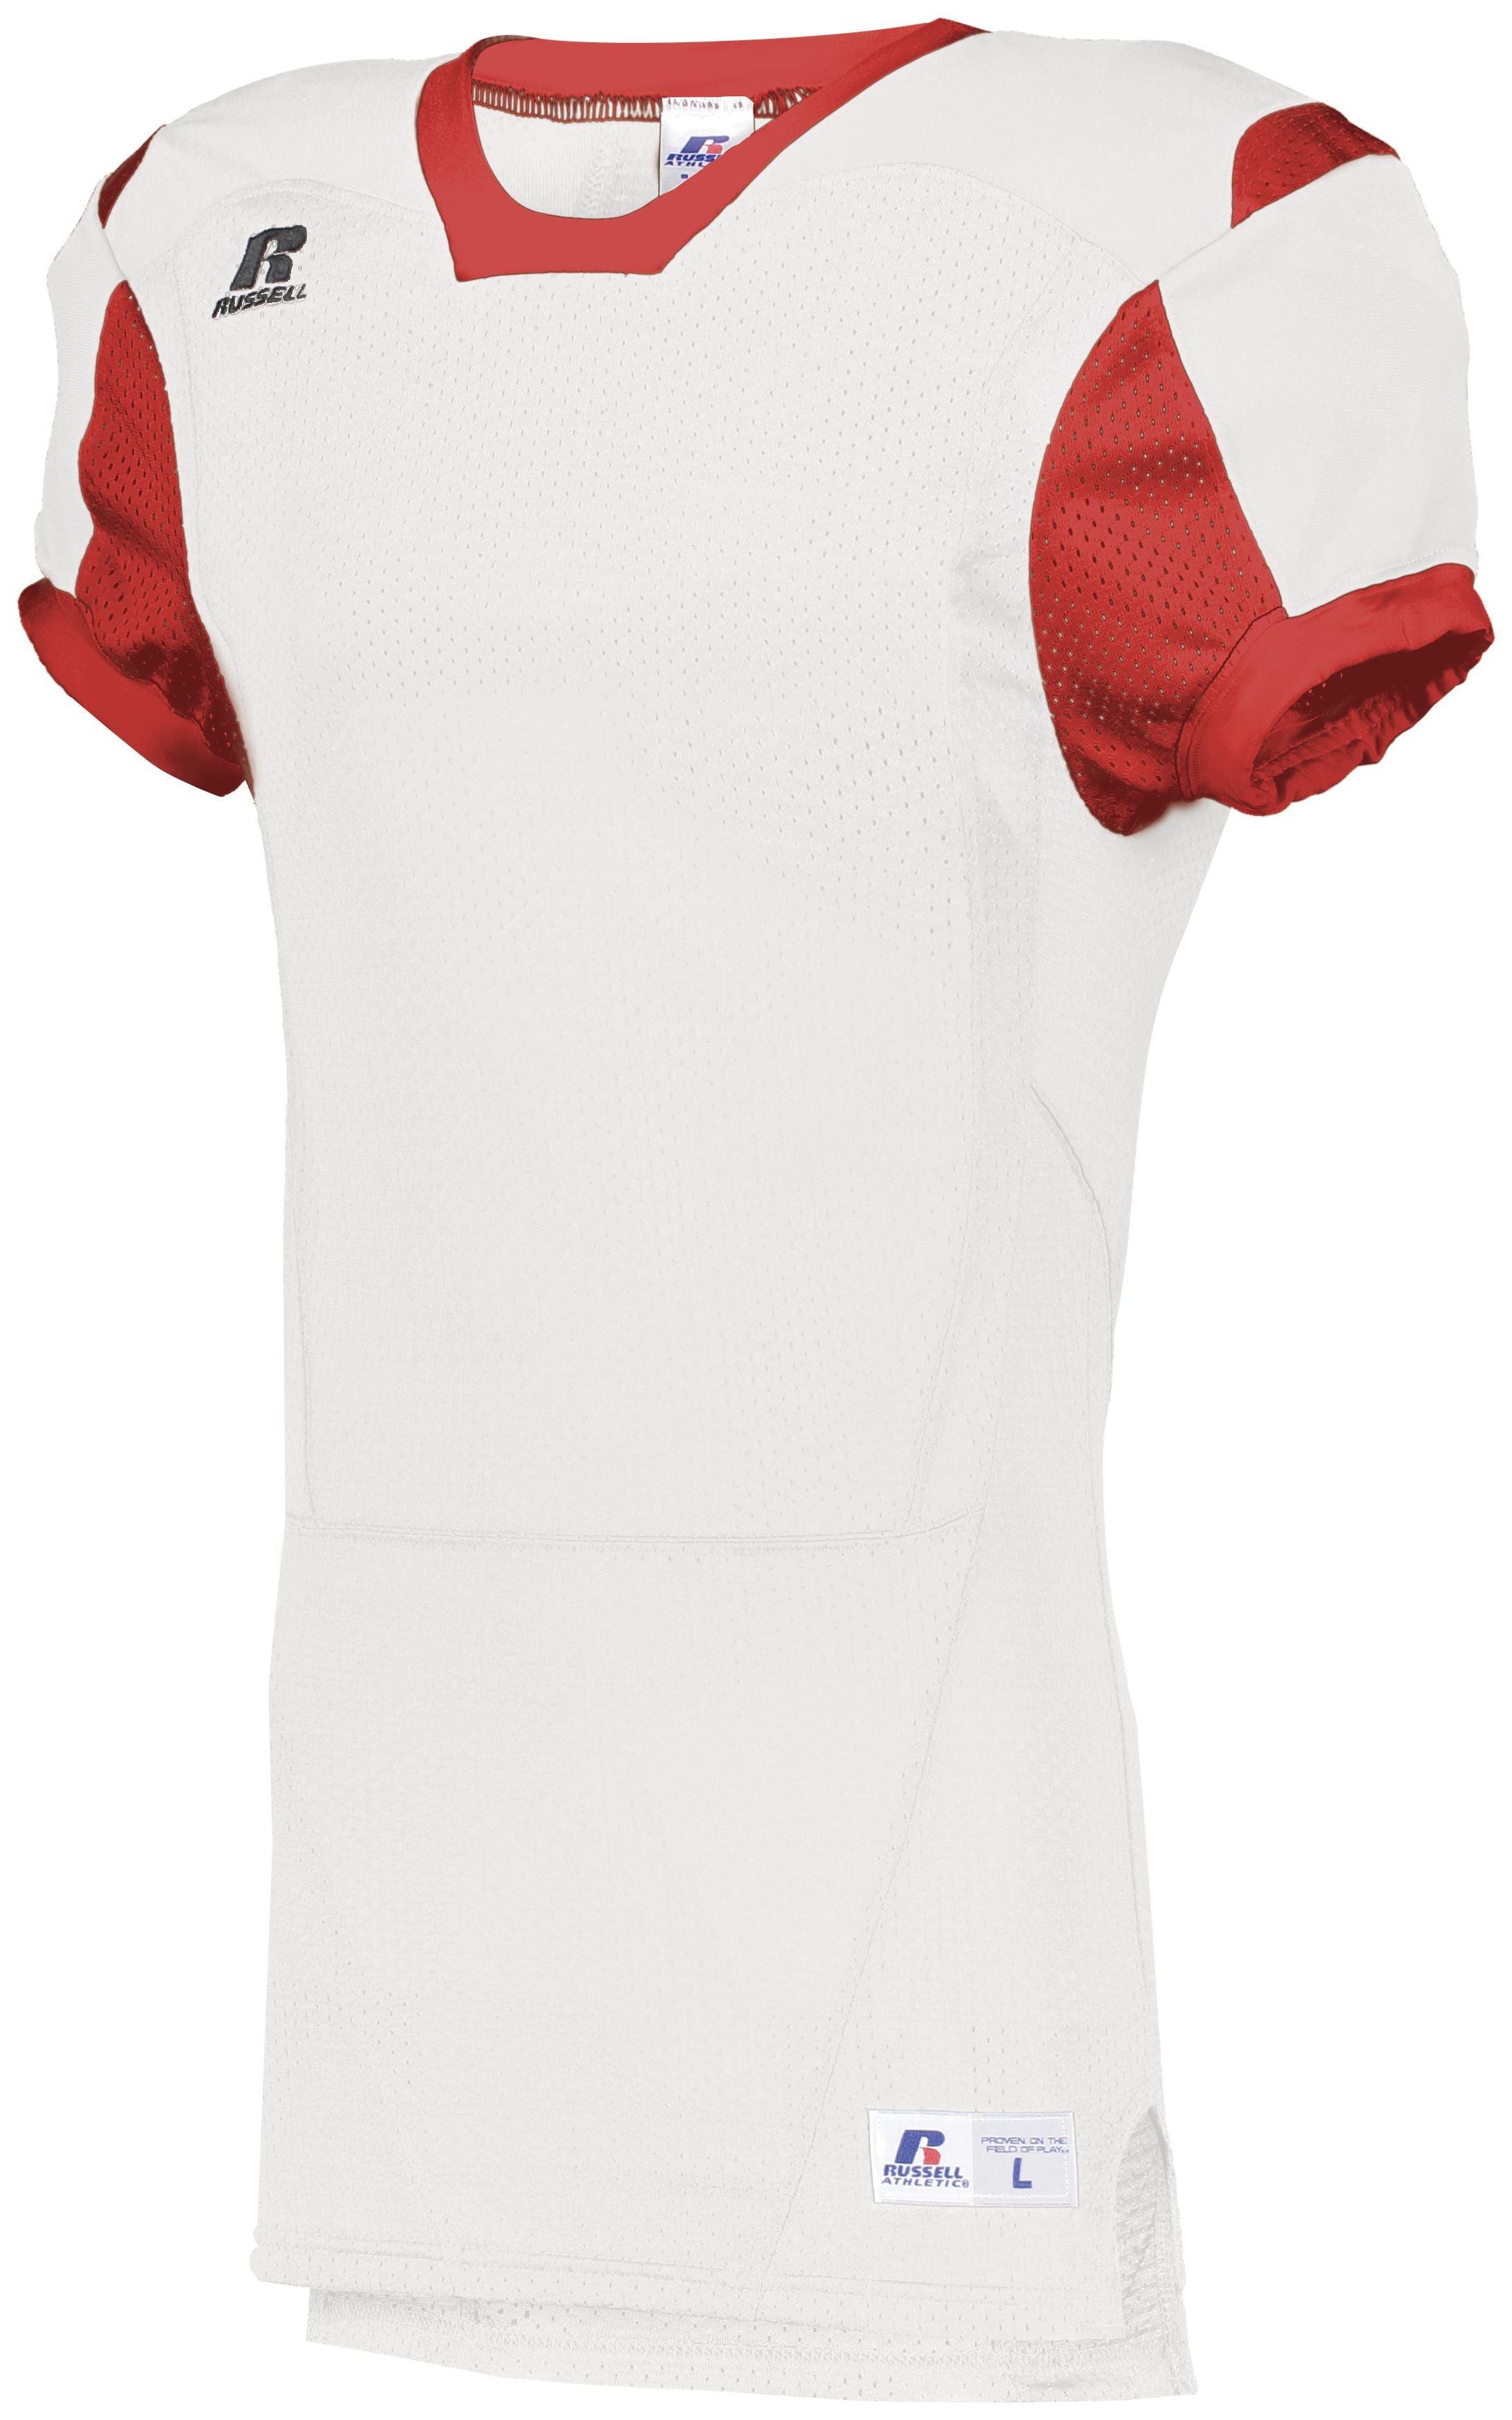 Russell Athletic Youth Color Block Game Jersey in White/True Red  -Part of the Youth, Youth-Jersey, Football, Russell-Athletic-Products, Shirts, All-Sports, All-Sports-1 product lines at KanaleyCreations.com